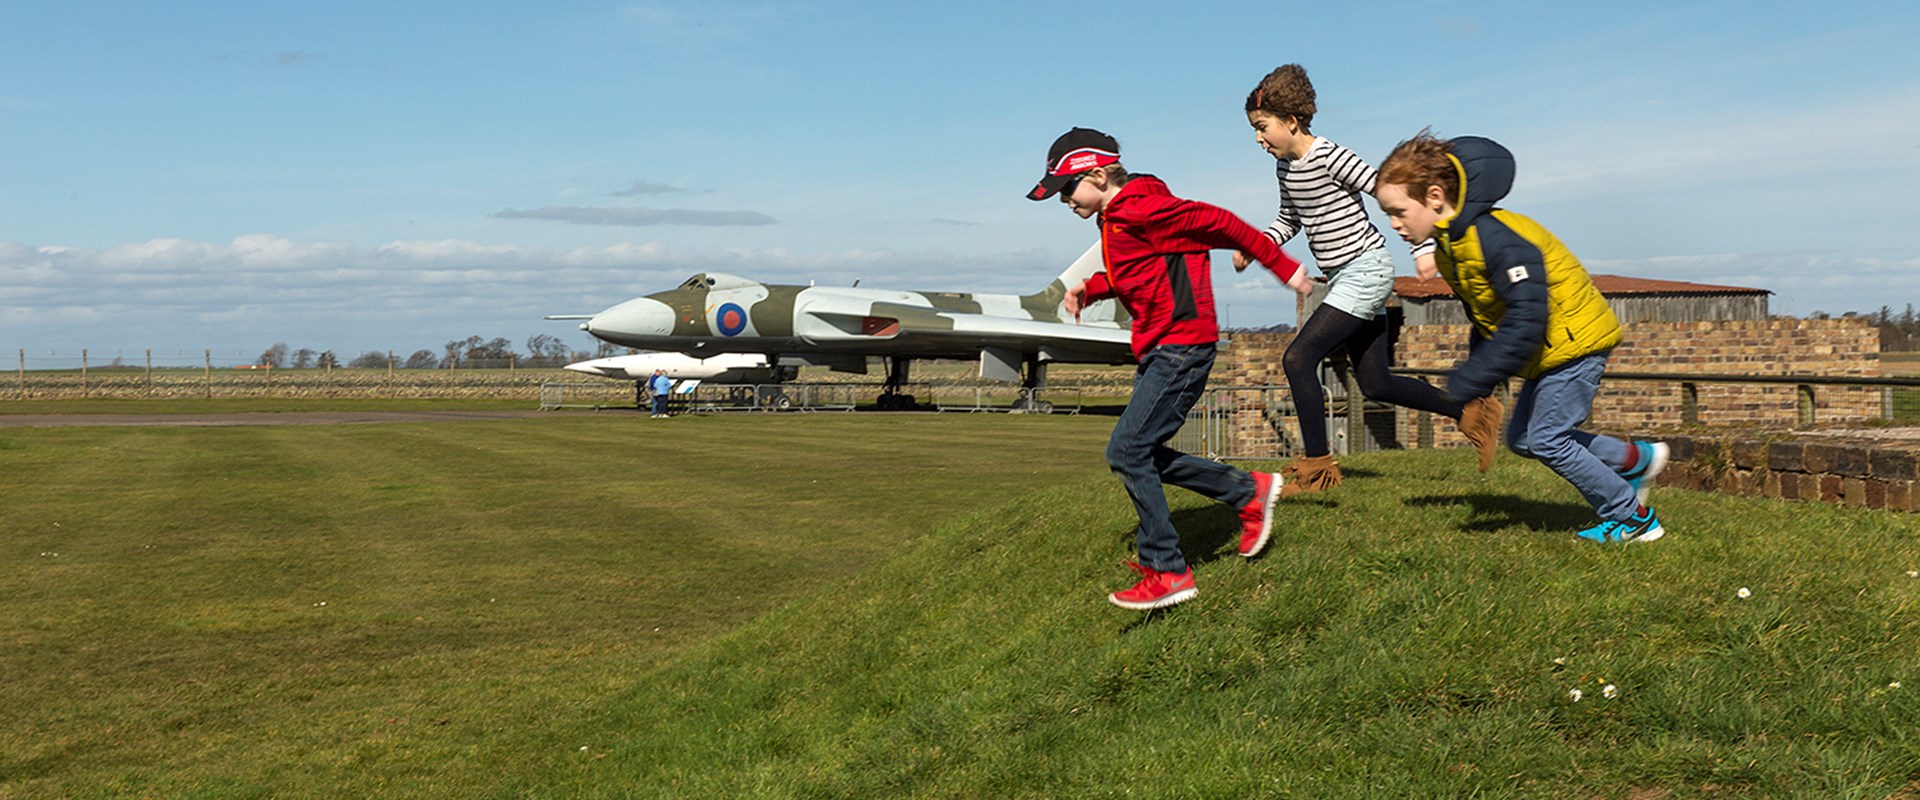 Three children running down a hill with a large aeroplane in the background.